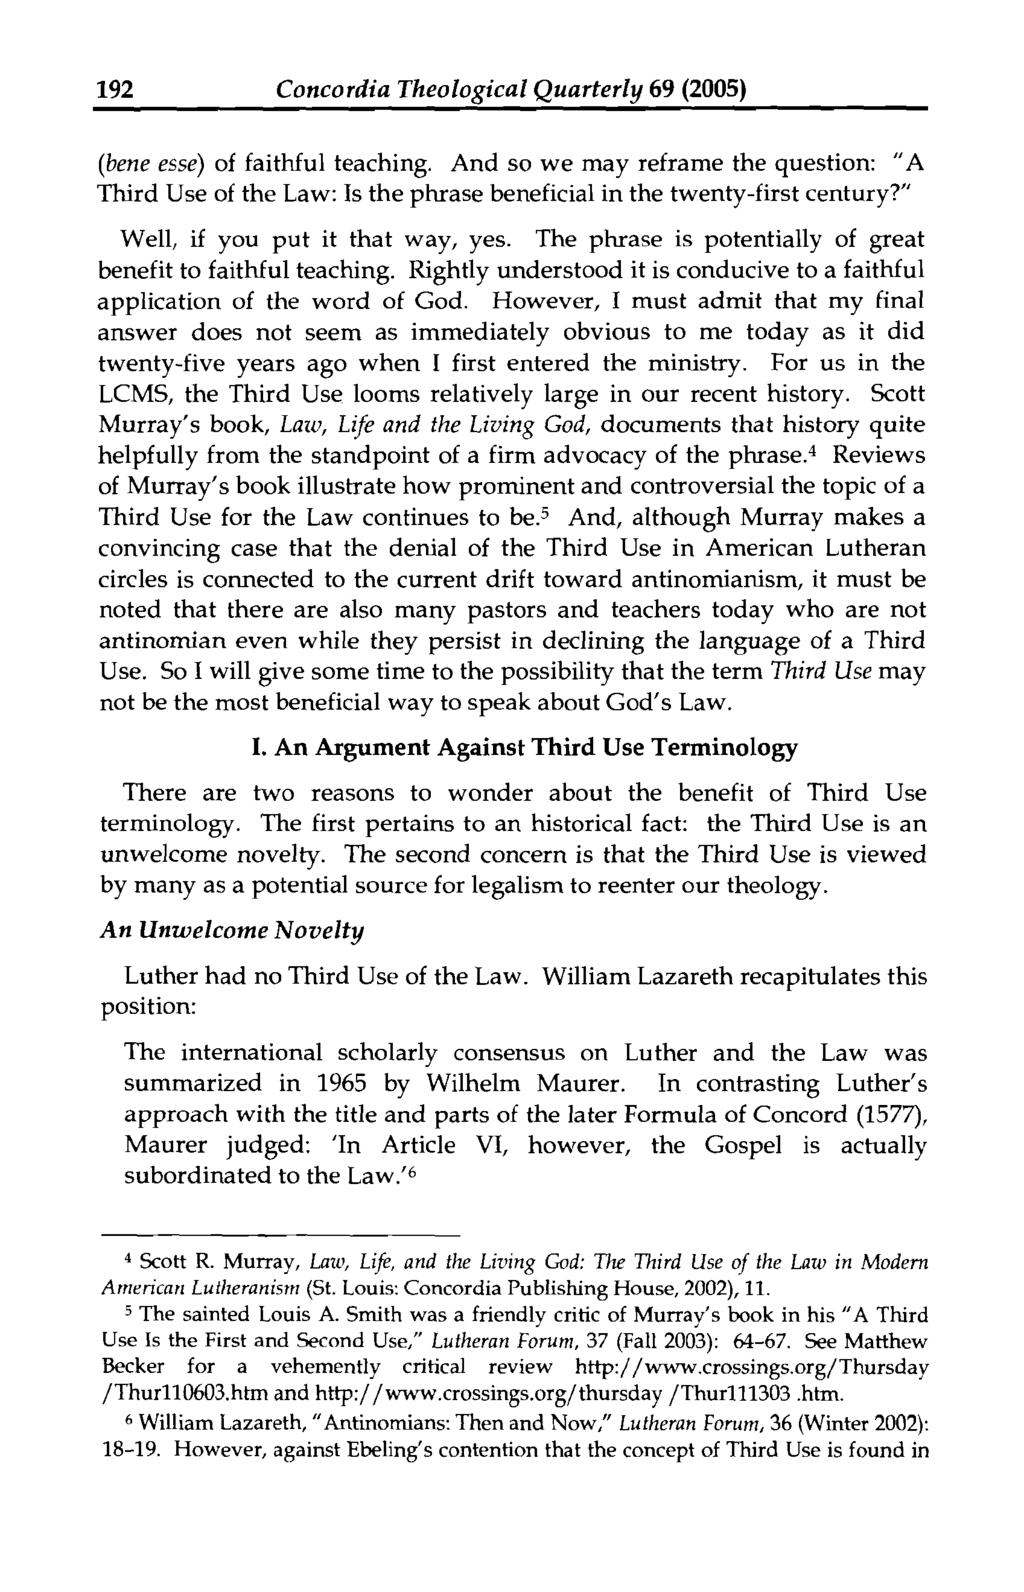 192 Concordia Theological Quarterly 69 (2005) (bene esse) of faithful teaching. And so we may reframe the question: "A Third Use of the Law: Is the phrase beneficial in the twenty-first century?